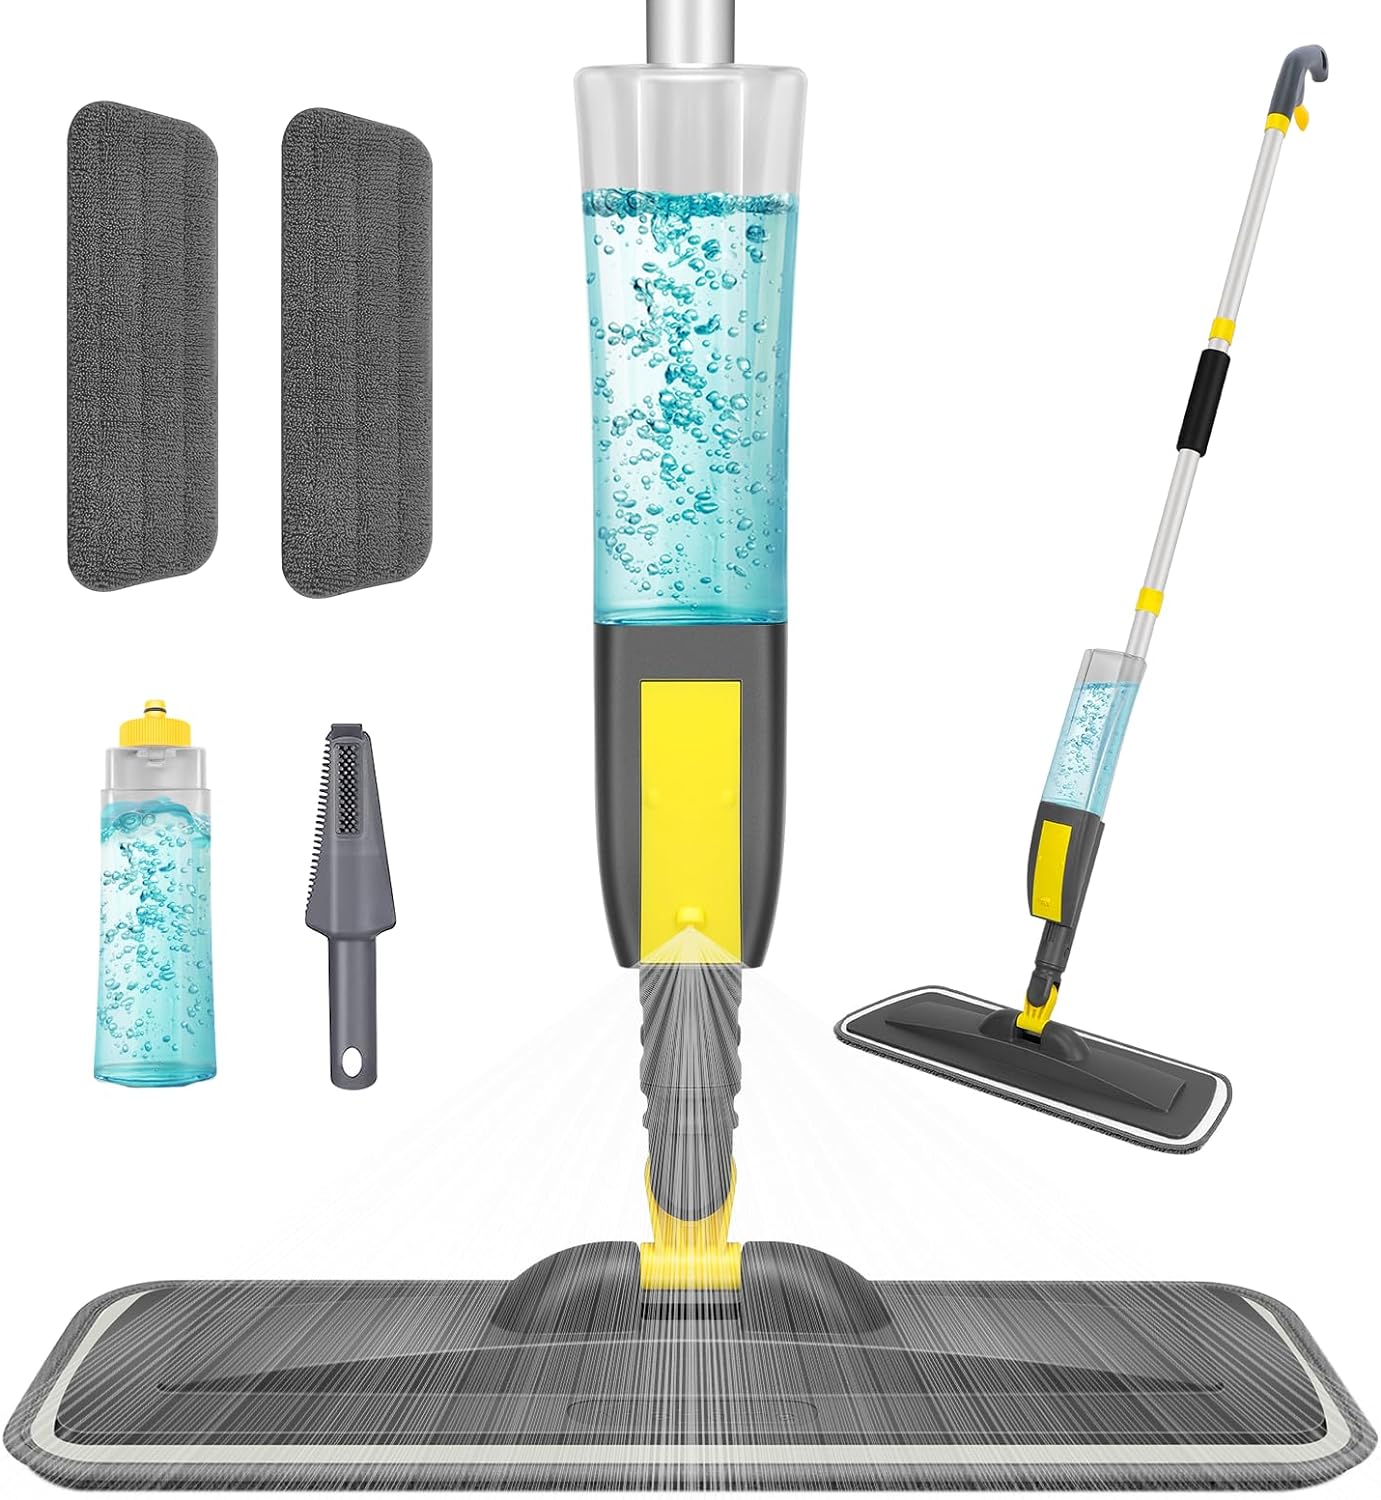 Time-Limited Discounts! Avail Your Offer - NileHome Mops for Floor Cleaning at Exclusive Promo Price!